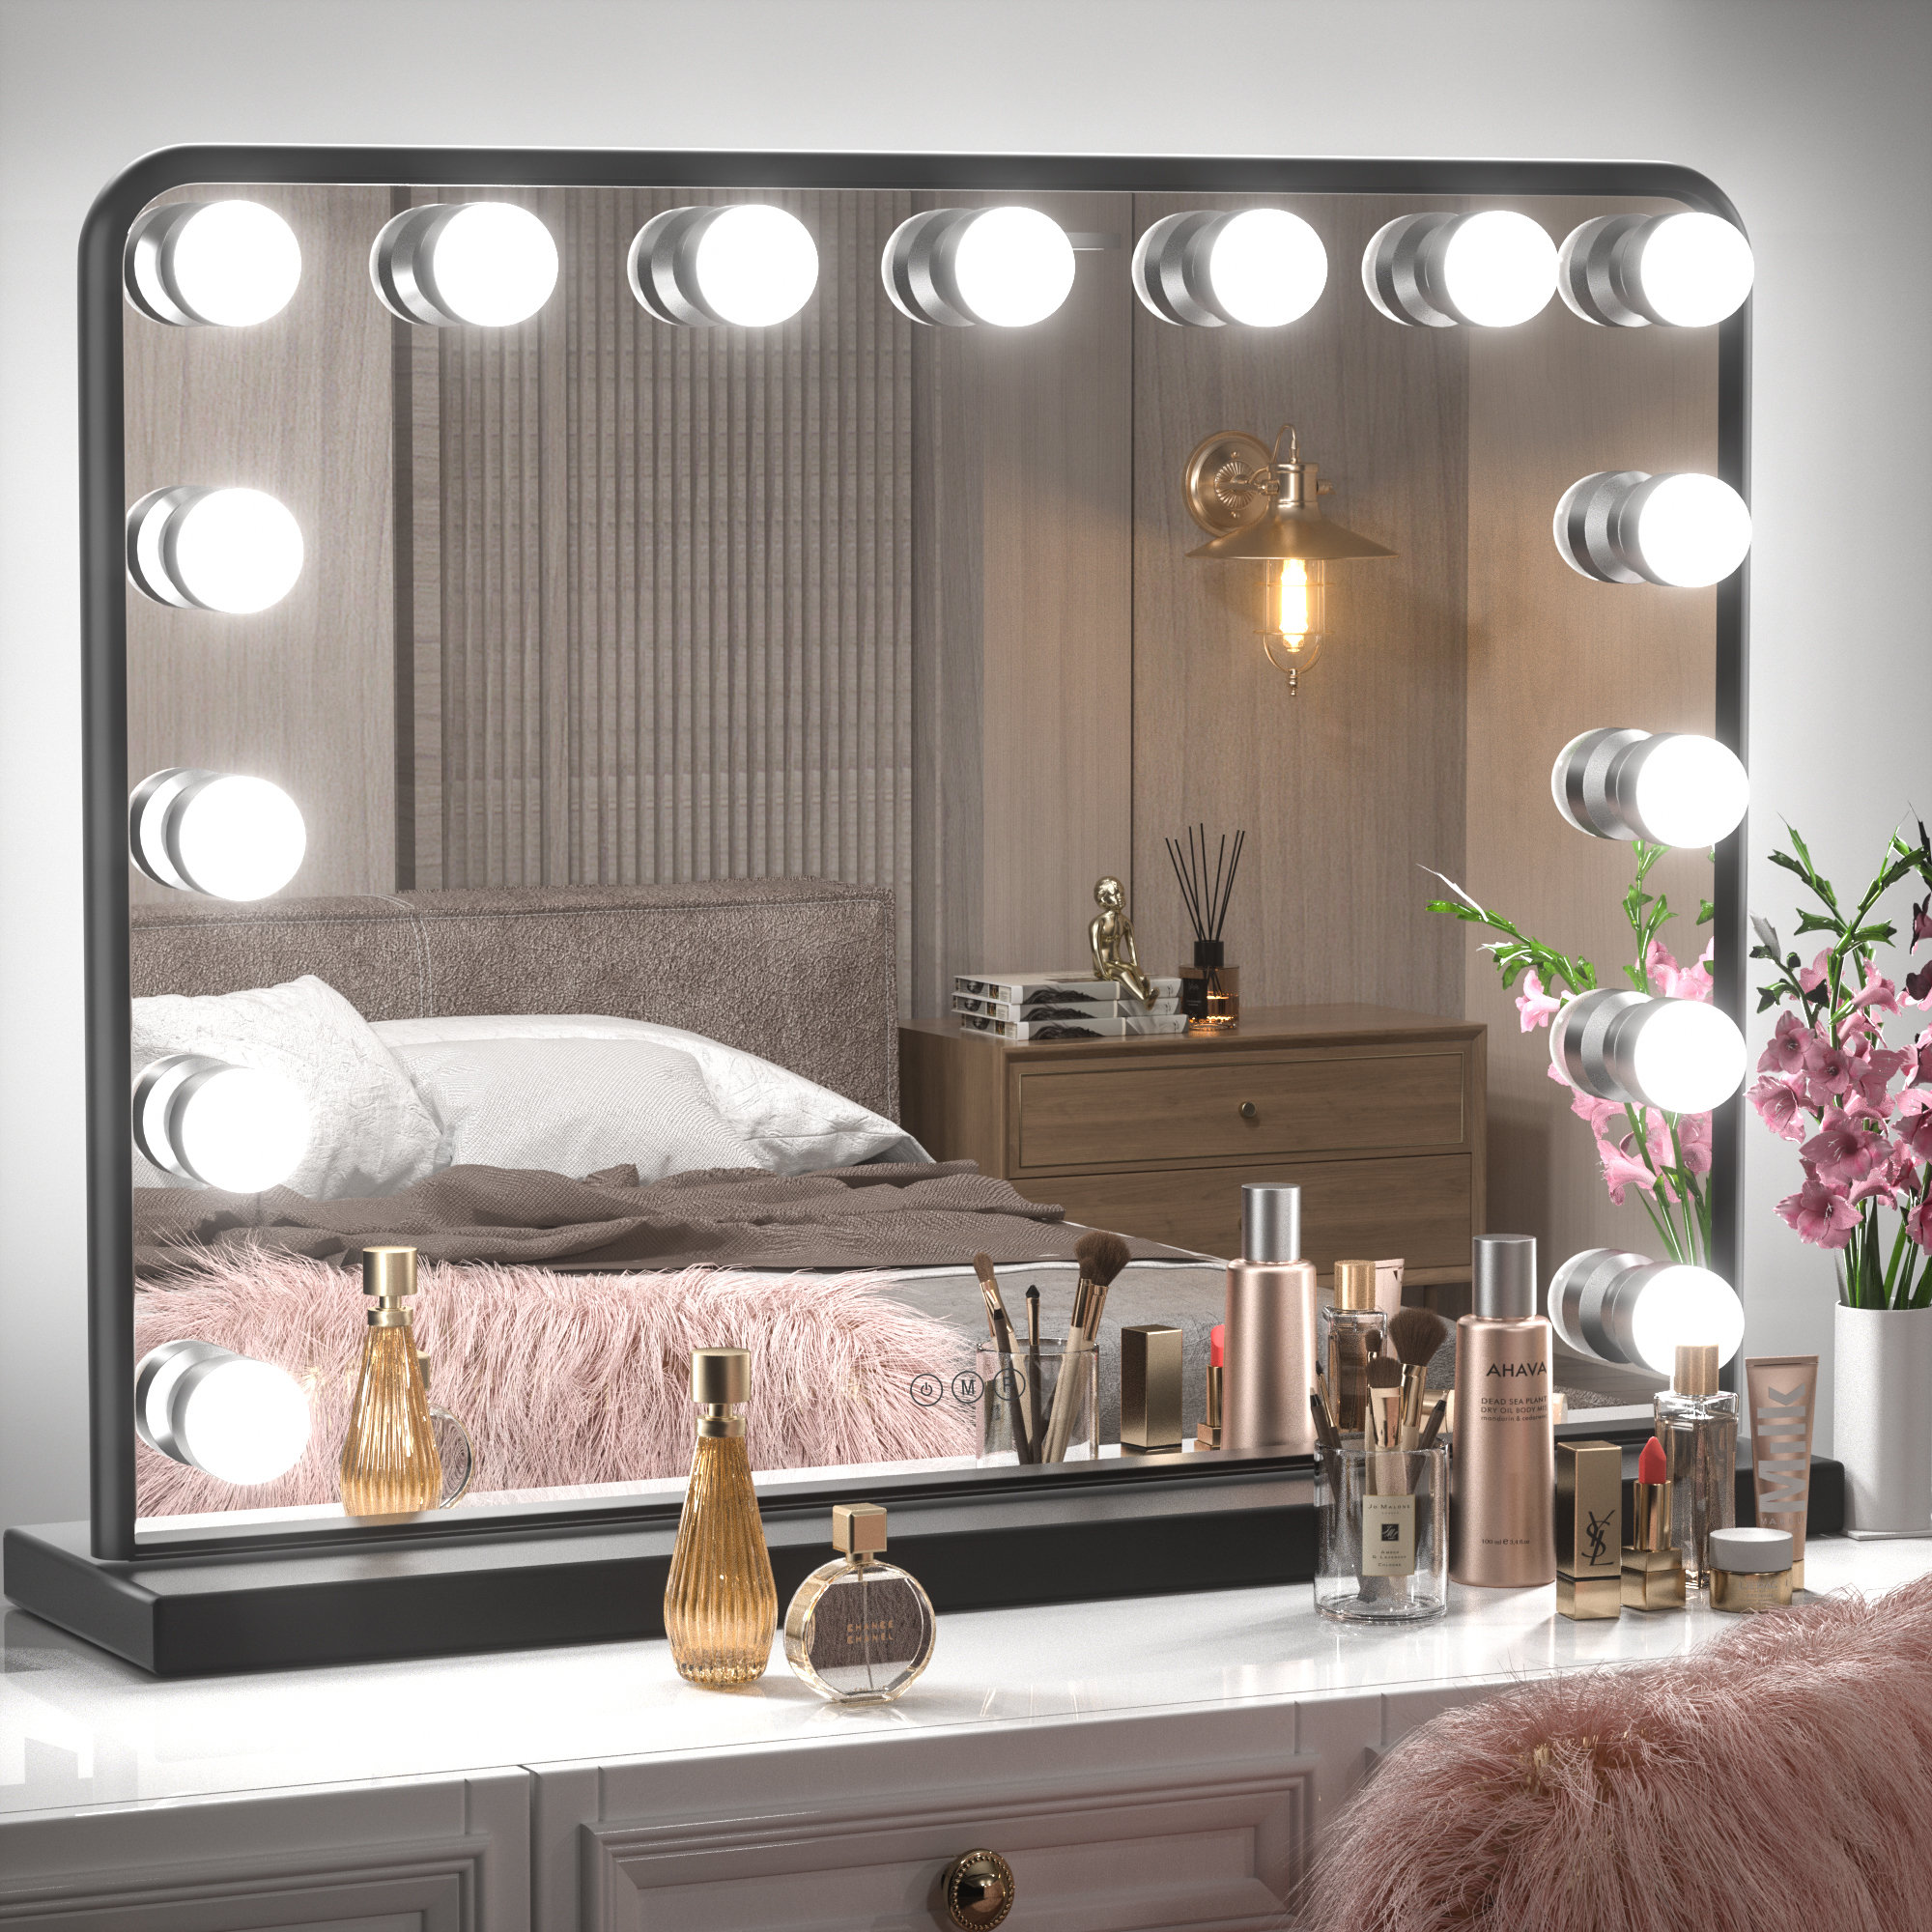 2024 New Hollywood Style Led Vanity Mirror Lights Kit - With 10 Dimmable  Light Bulbs For Makeup Dressing Table And Power Supply, Plug-in Lighting Fi